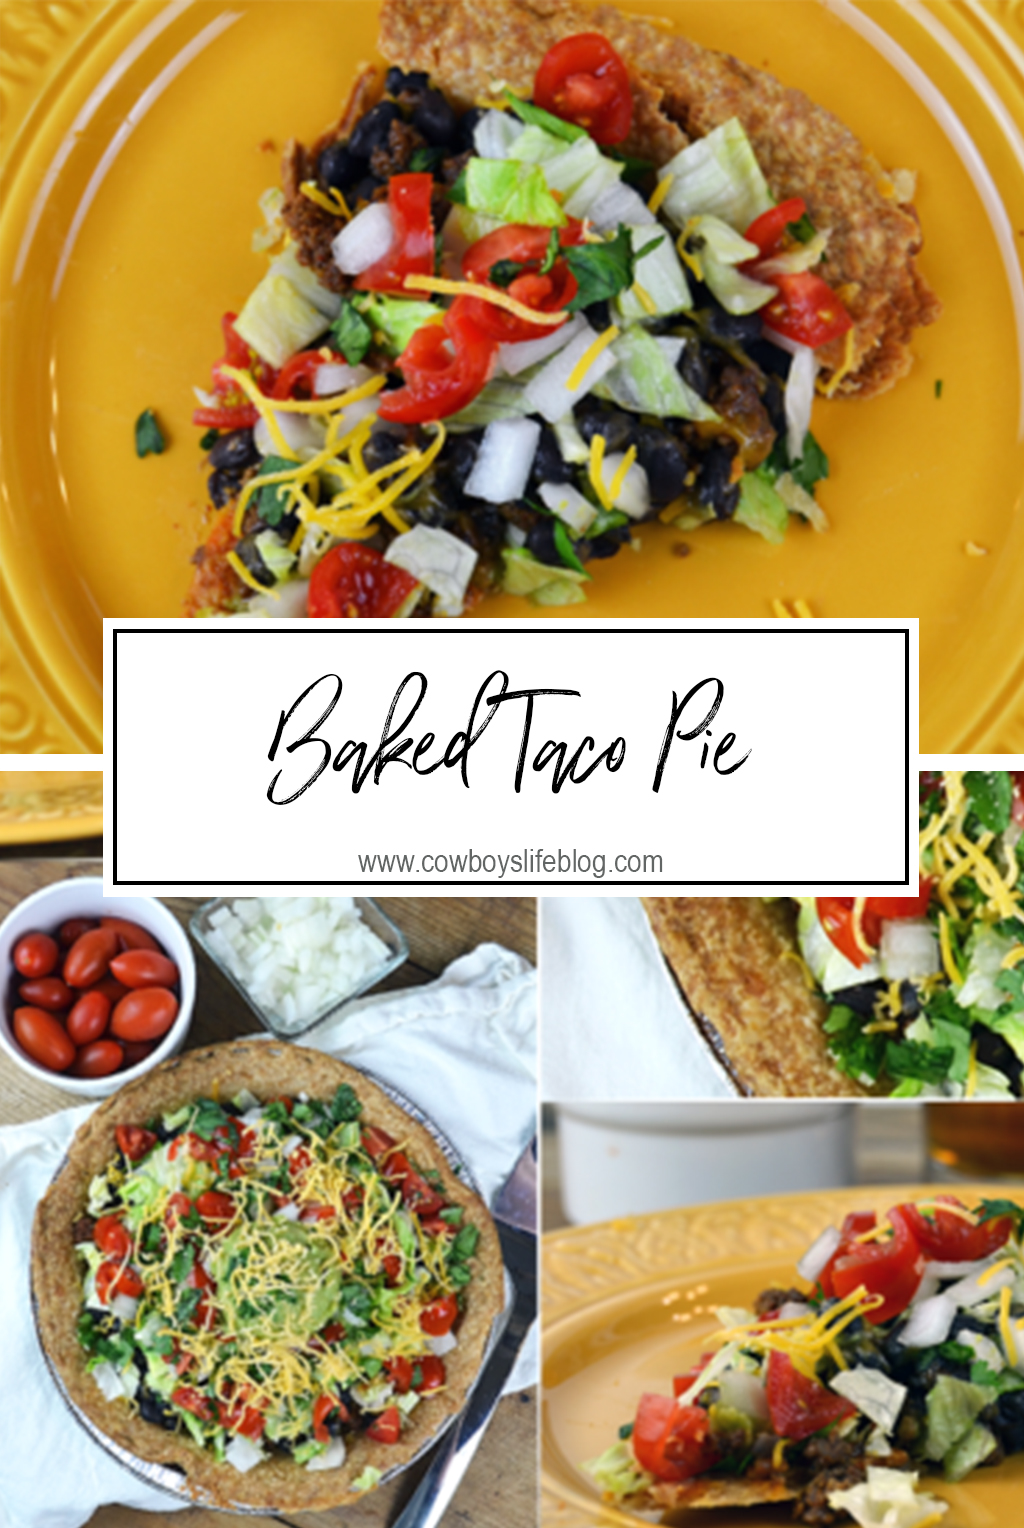 How to make this Baked Taco Pie recipe